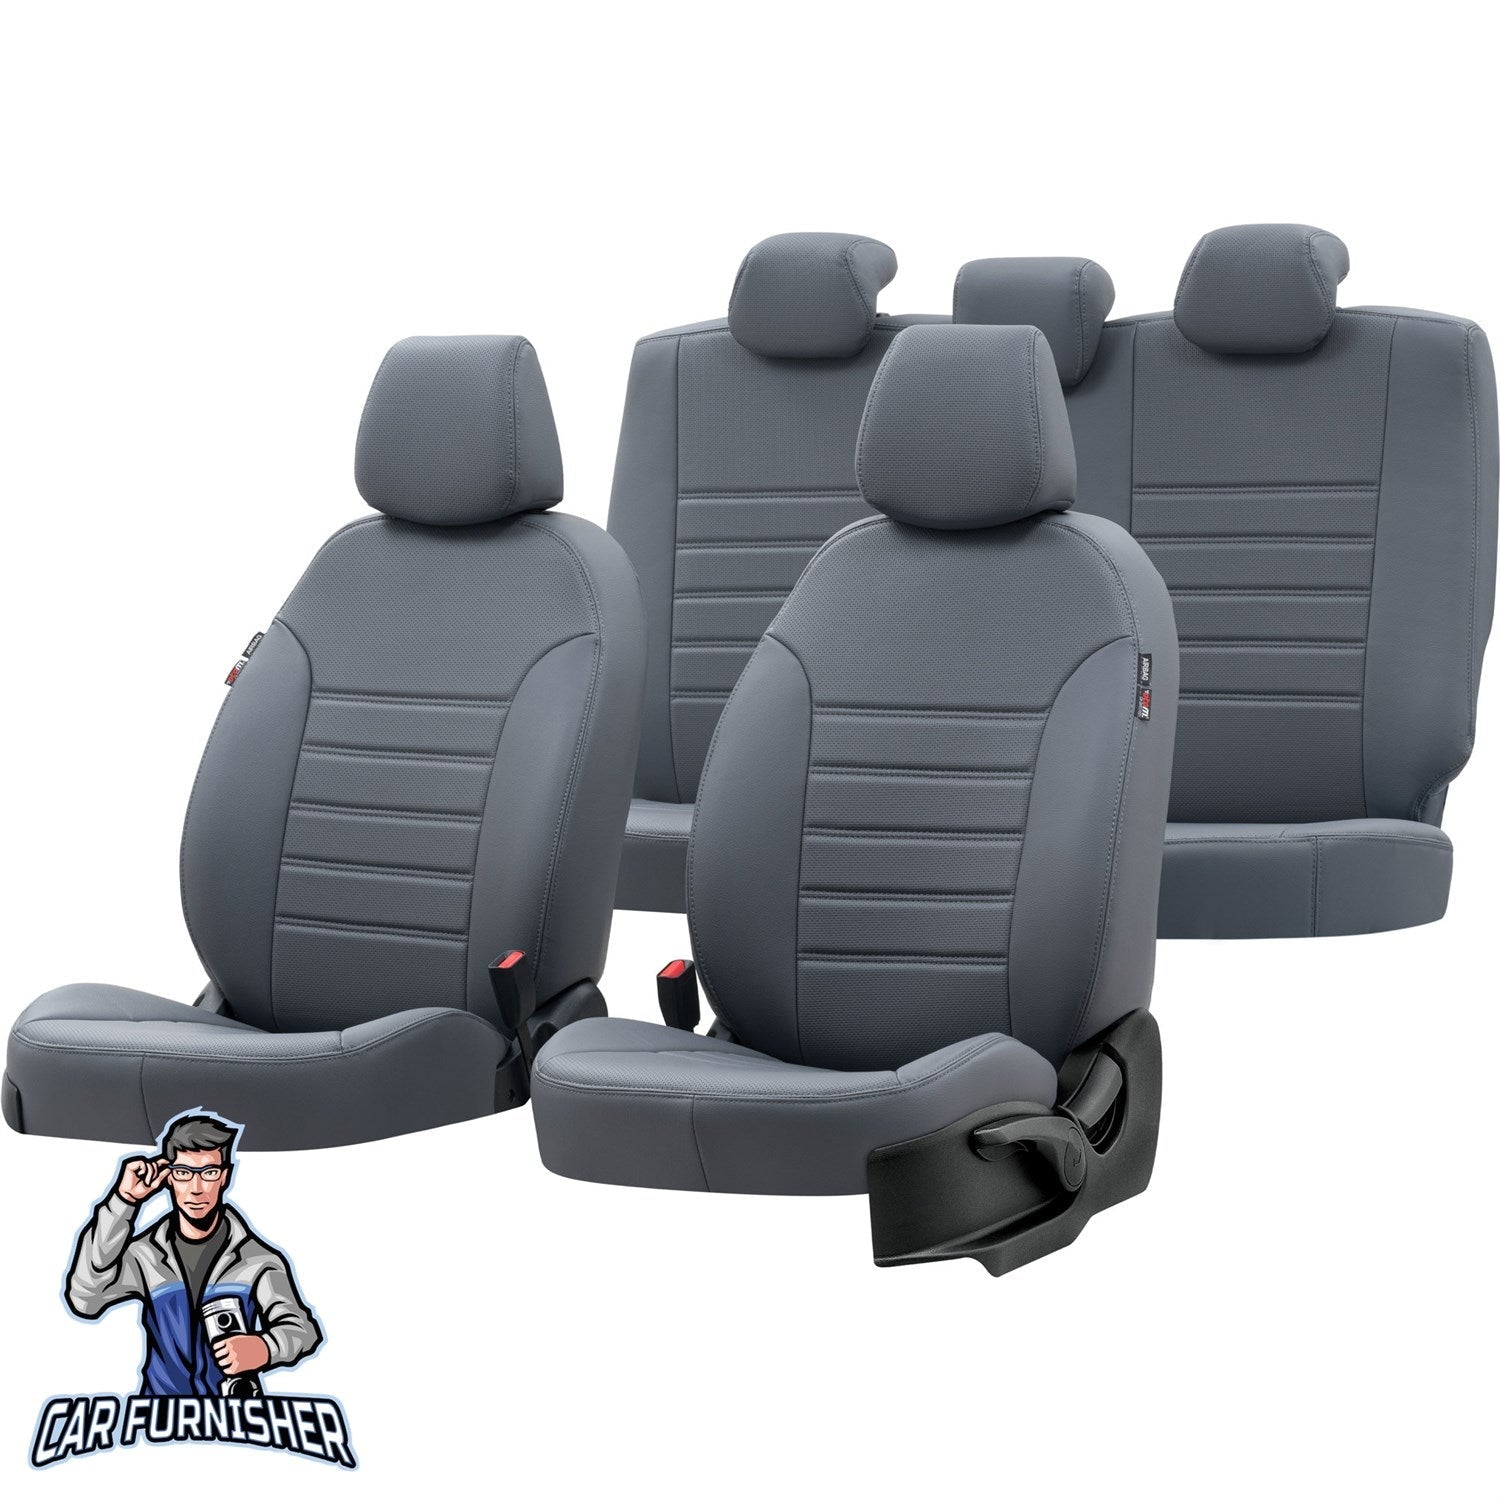 Chevrolet Tahoe Car Seat Covers 2007-2014 GMT/LS/LTZ New York Smoked Full Set (5 Seats + Handrest) Leather & Fabric